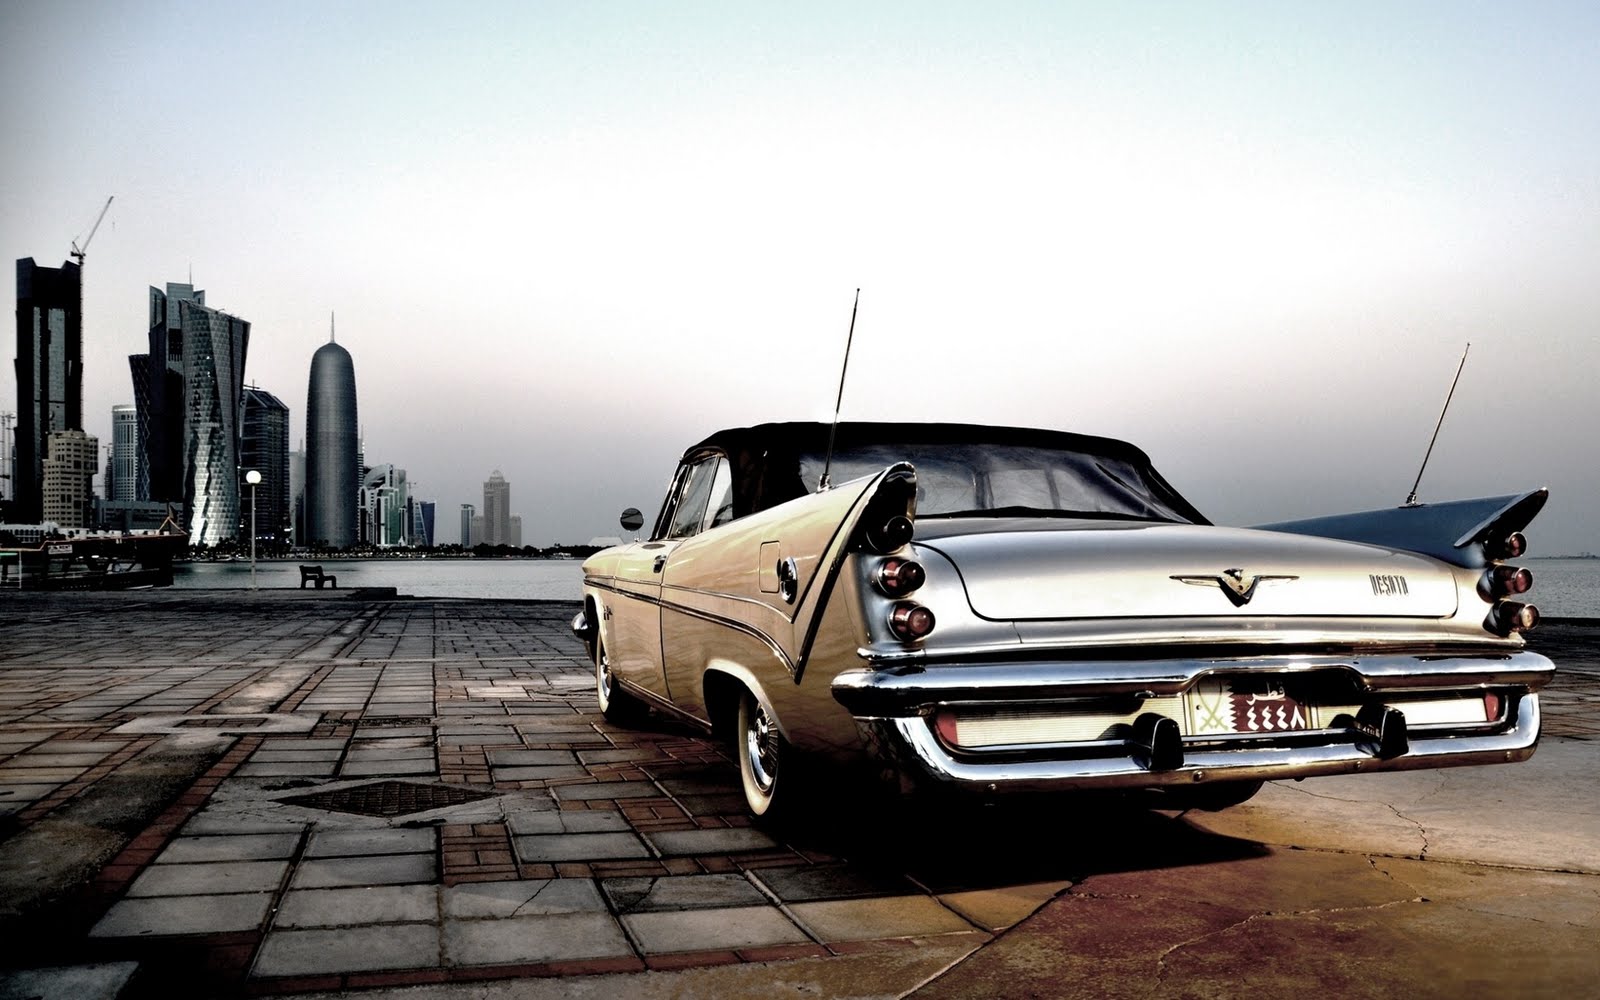 Chrysler Desoto City Old Car Photo HD Wallpaper Is A Great